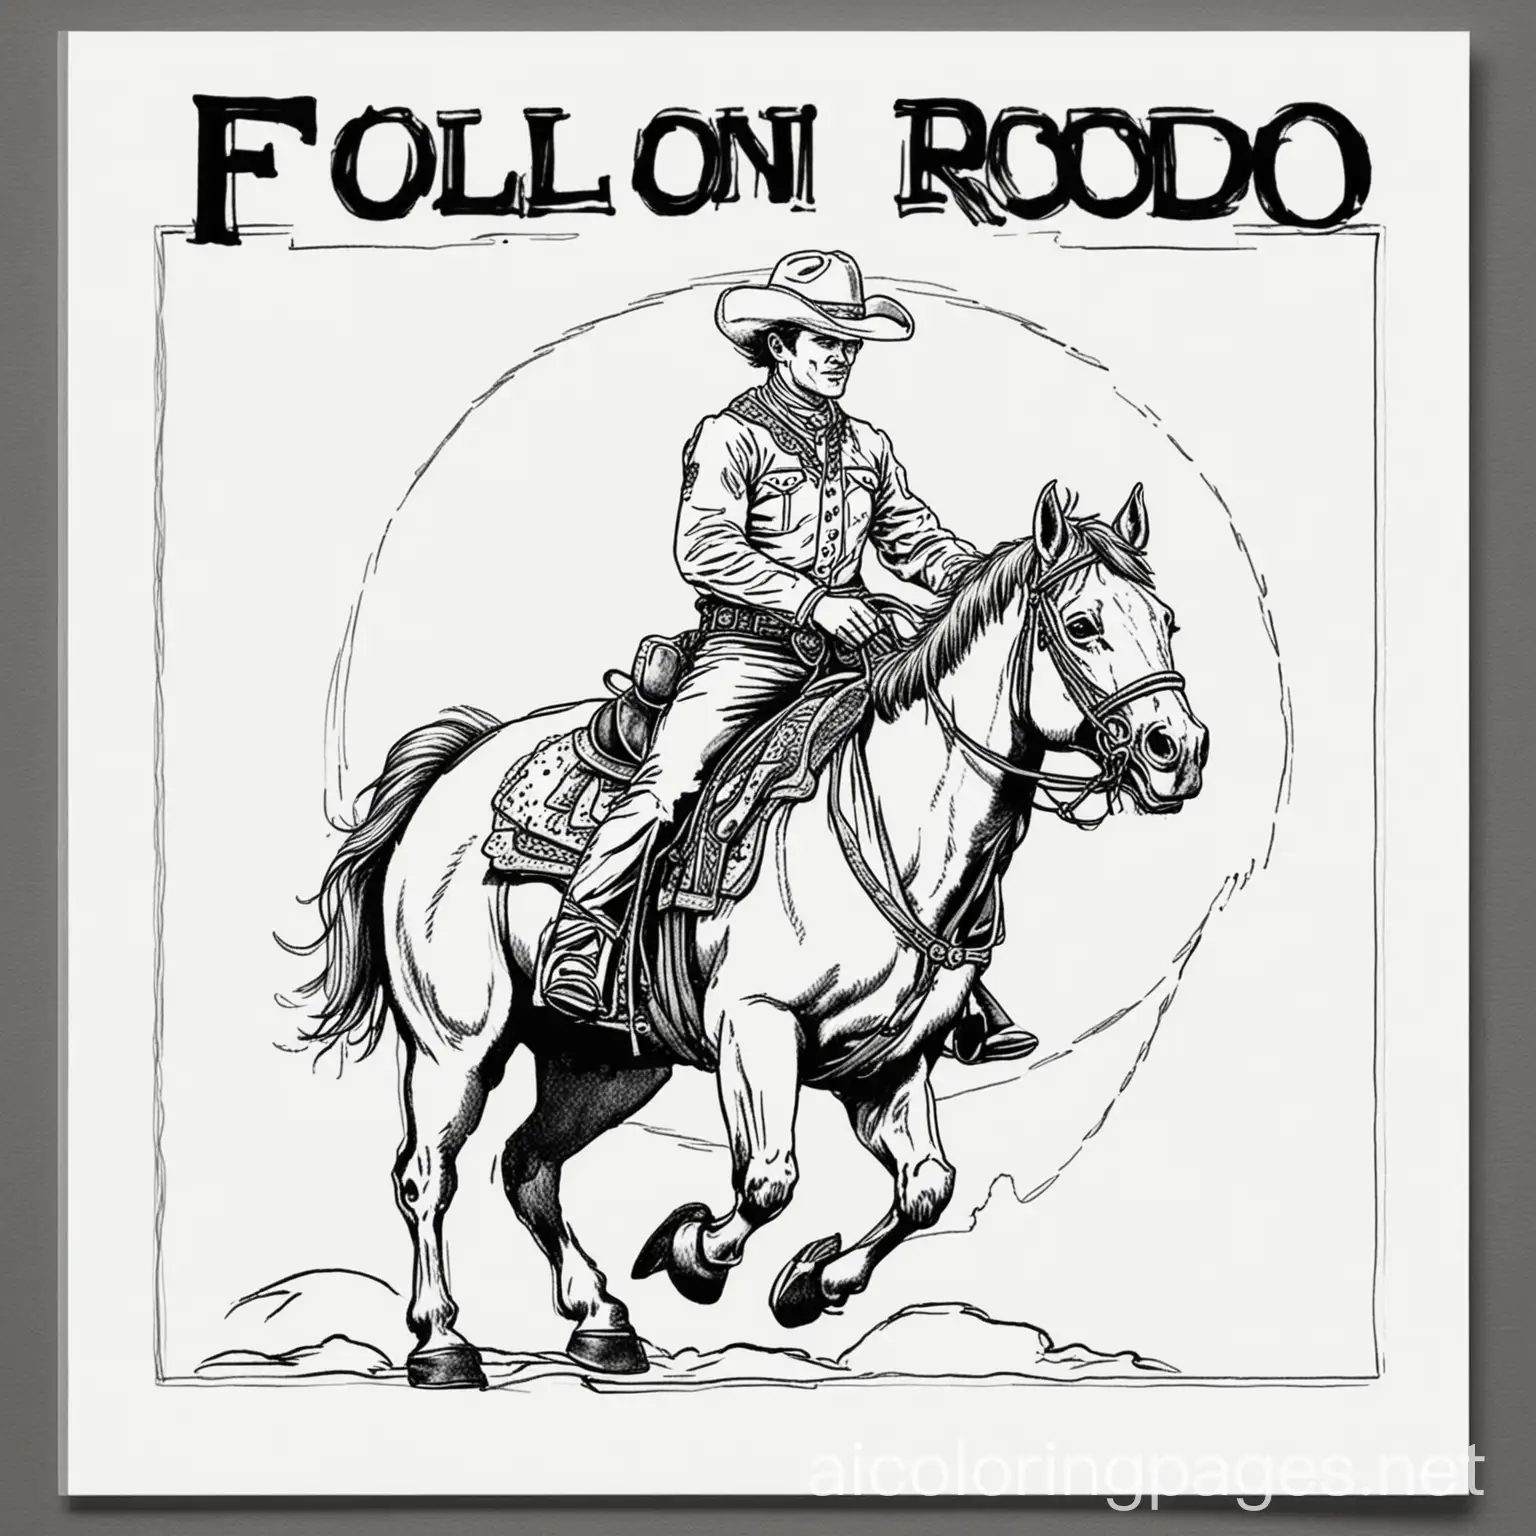 "FOLSOM   RODEO " in banner  coloring page, Coloring Page, black and white, line art, white background, Simplicity, Ample White Space. The background of the coloring page is plain white to make it easy for young children to color within the lines. The outlines of all the subjects are easy to distinguish, making it simple for kids to color without too much difficulty